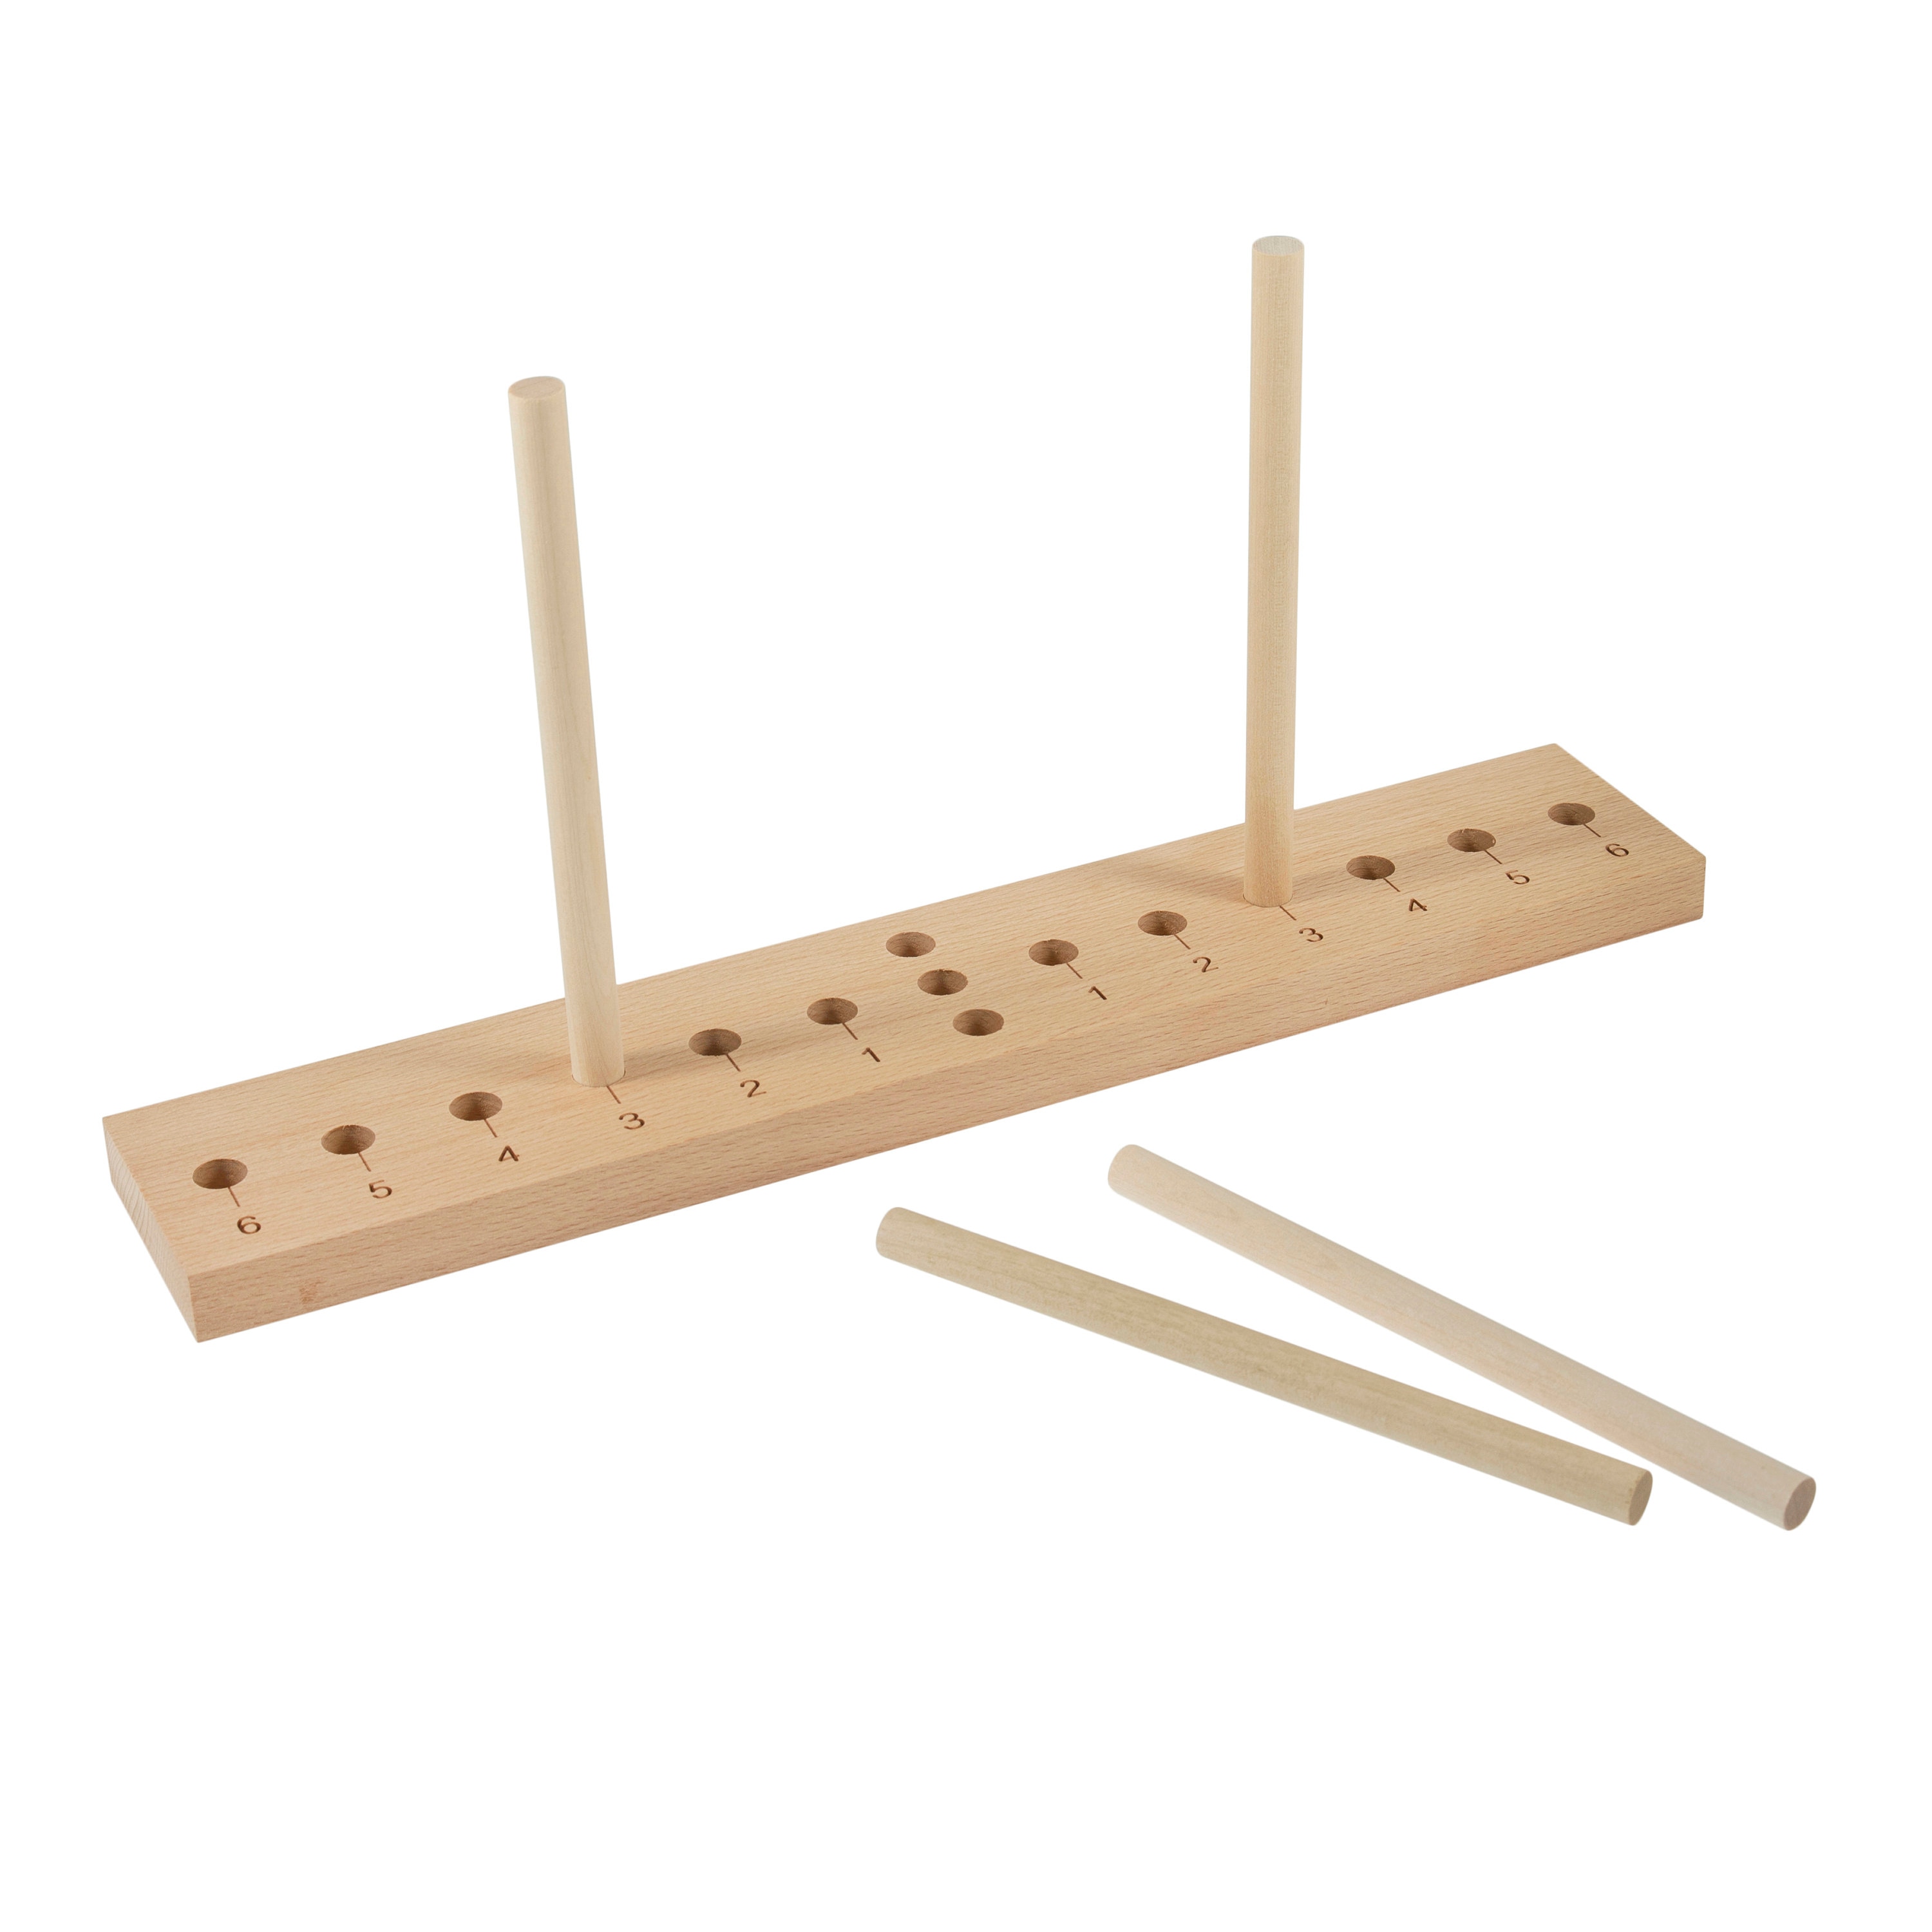 Wooden Bow Maker Peg & Board Set for Making Bows From 3cm 1 3/16in to 30cm  12 Inch 